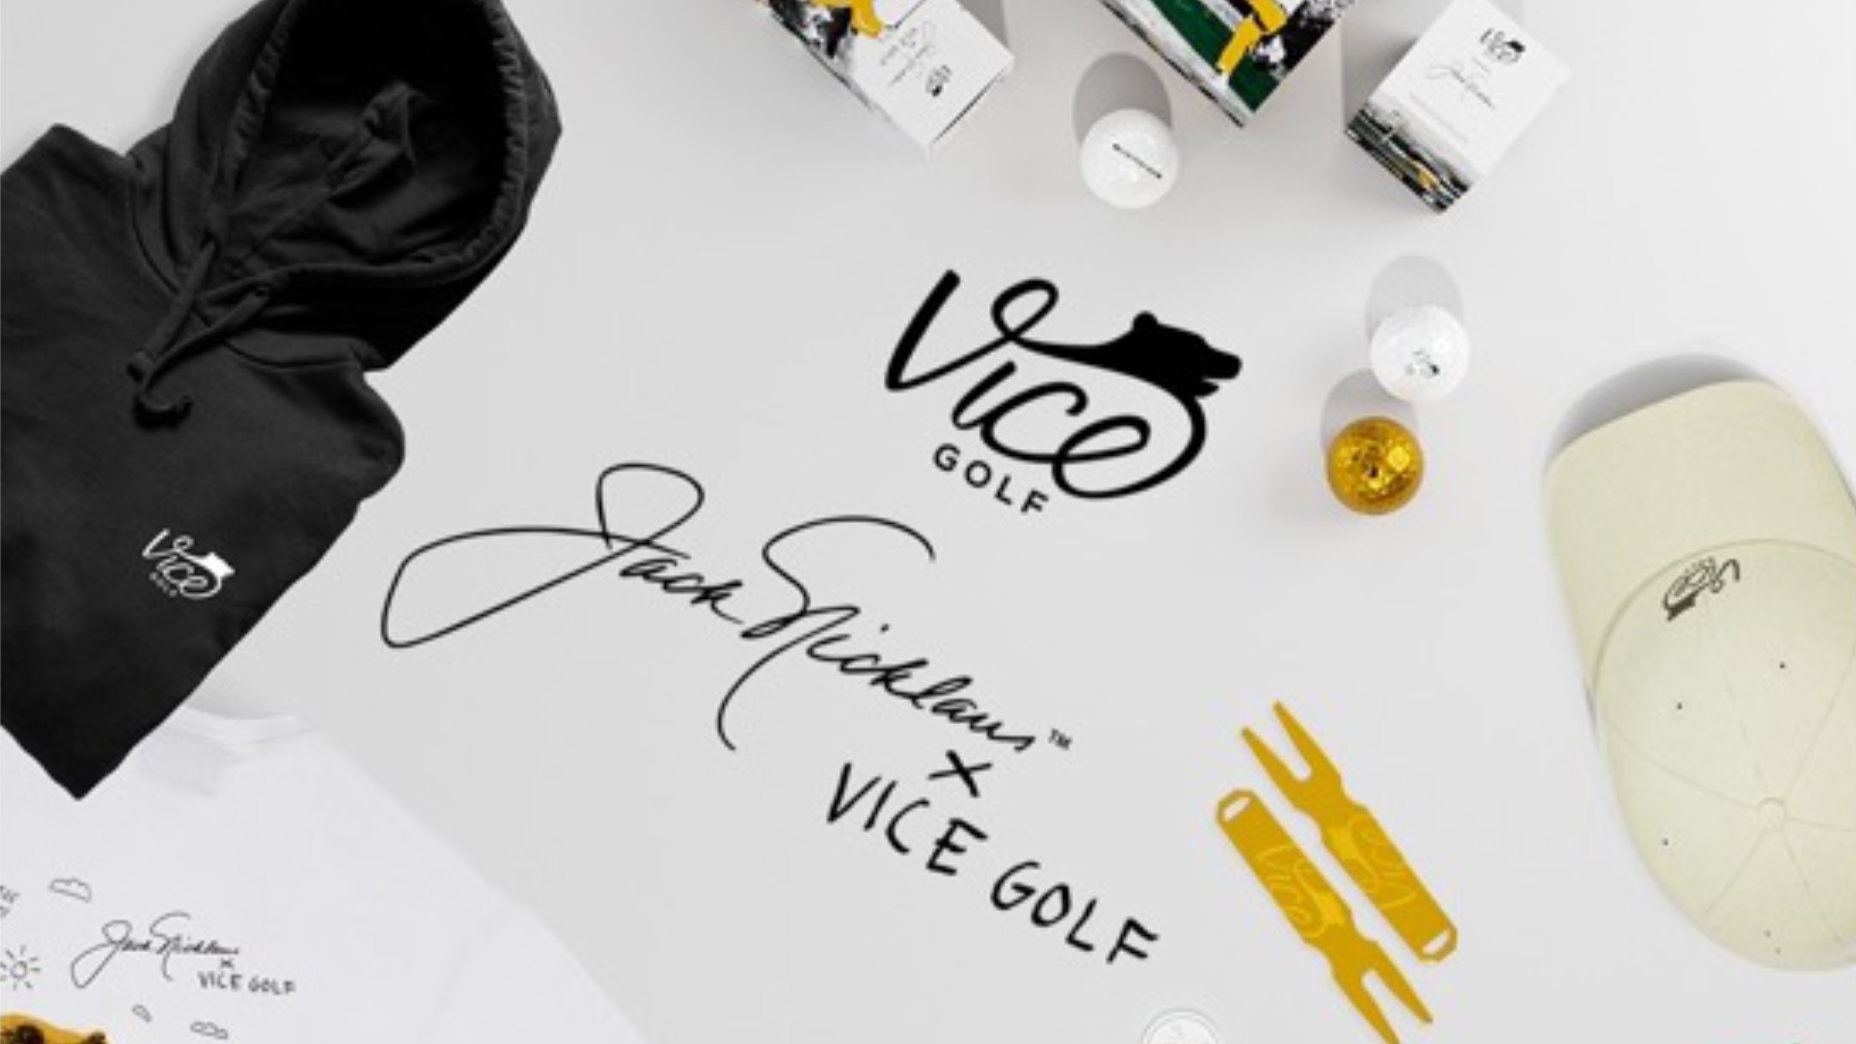 Iconic Vice Golf + Nicklaus Brands Team Up in Legendary Collaboration